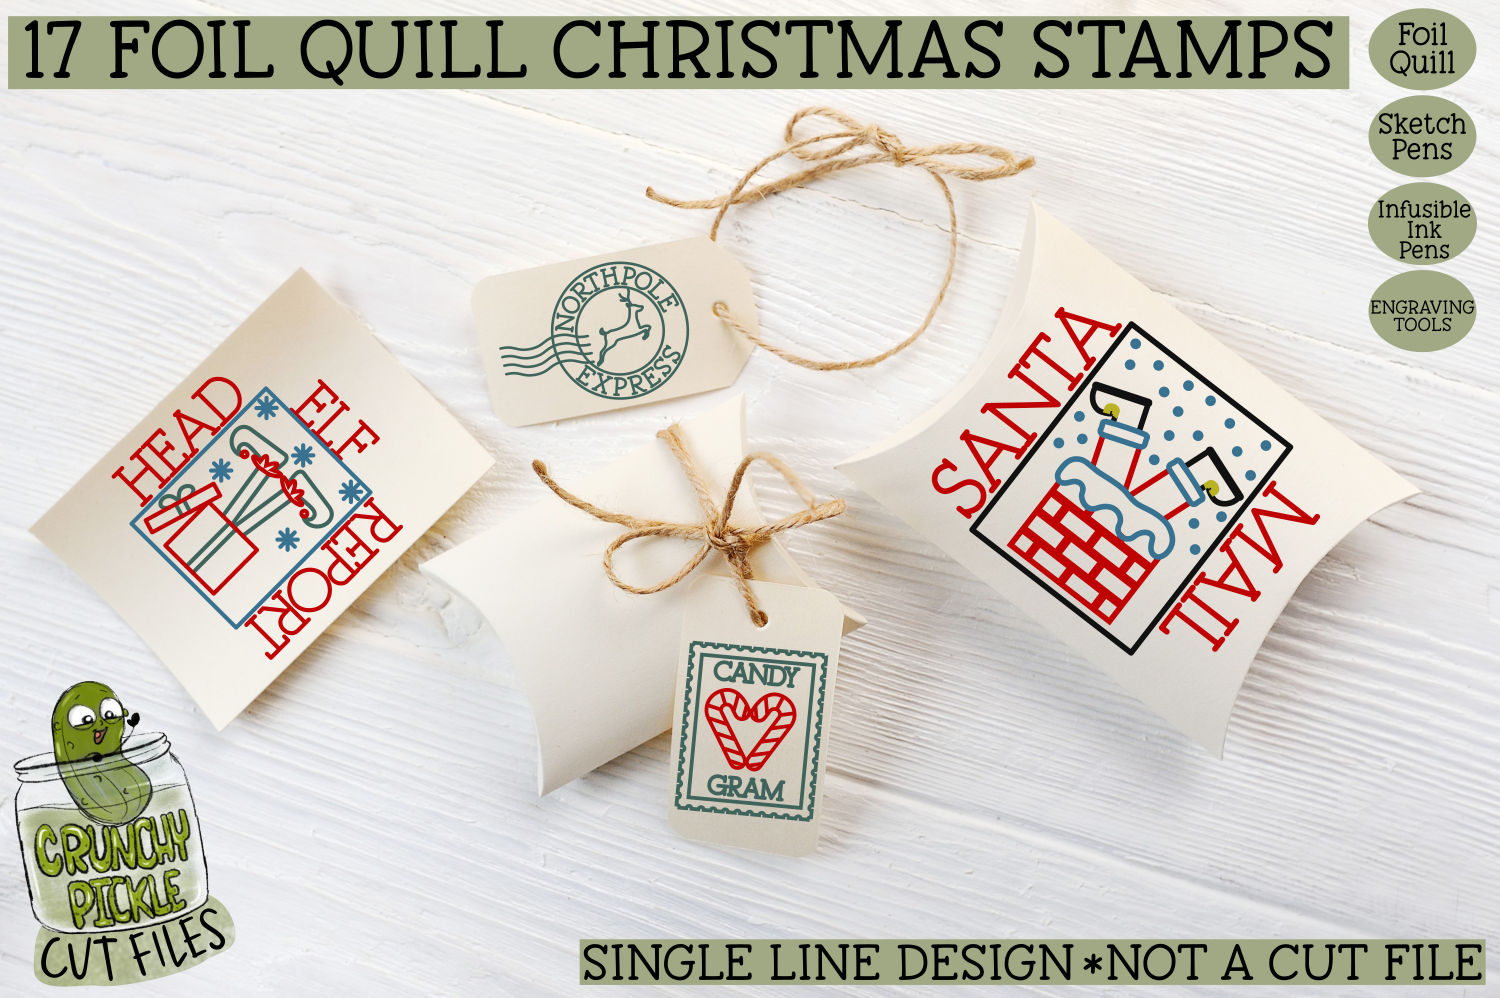 Foil Quill 17 Christmas Stamps By Crunchy Pickle Thehungryjpeg Com